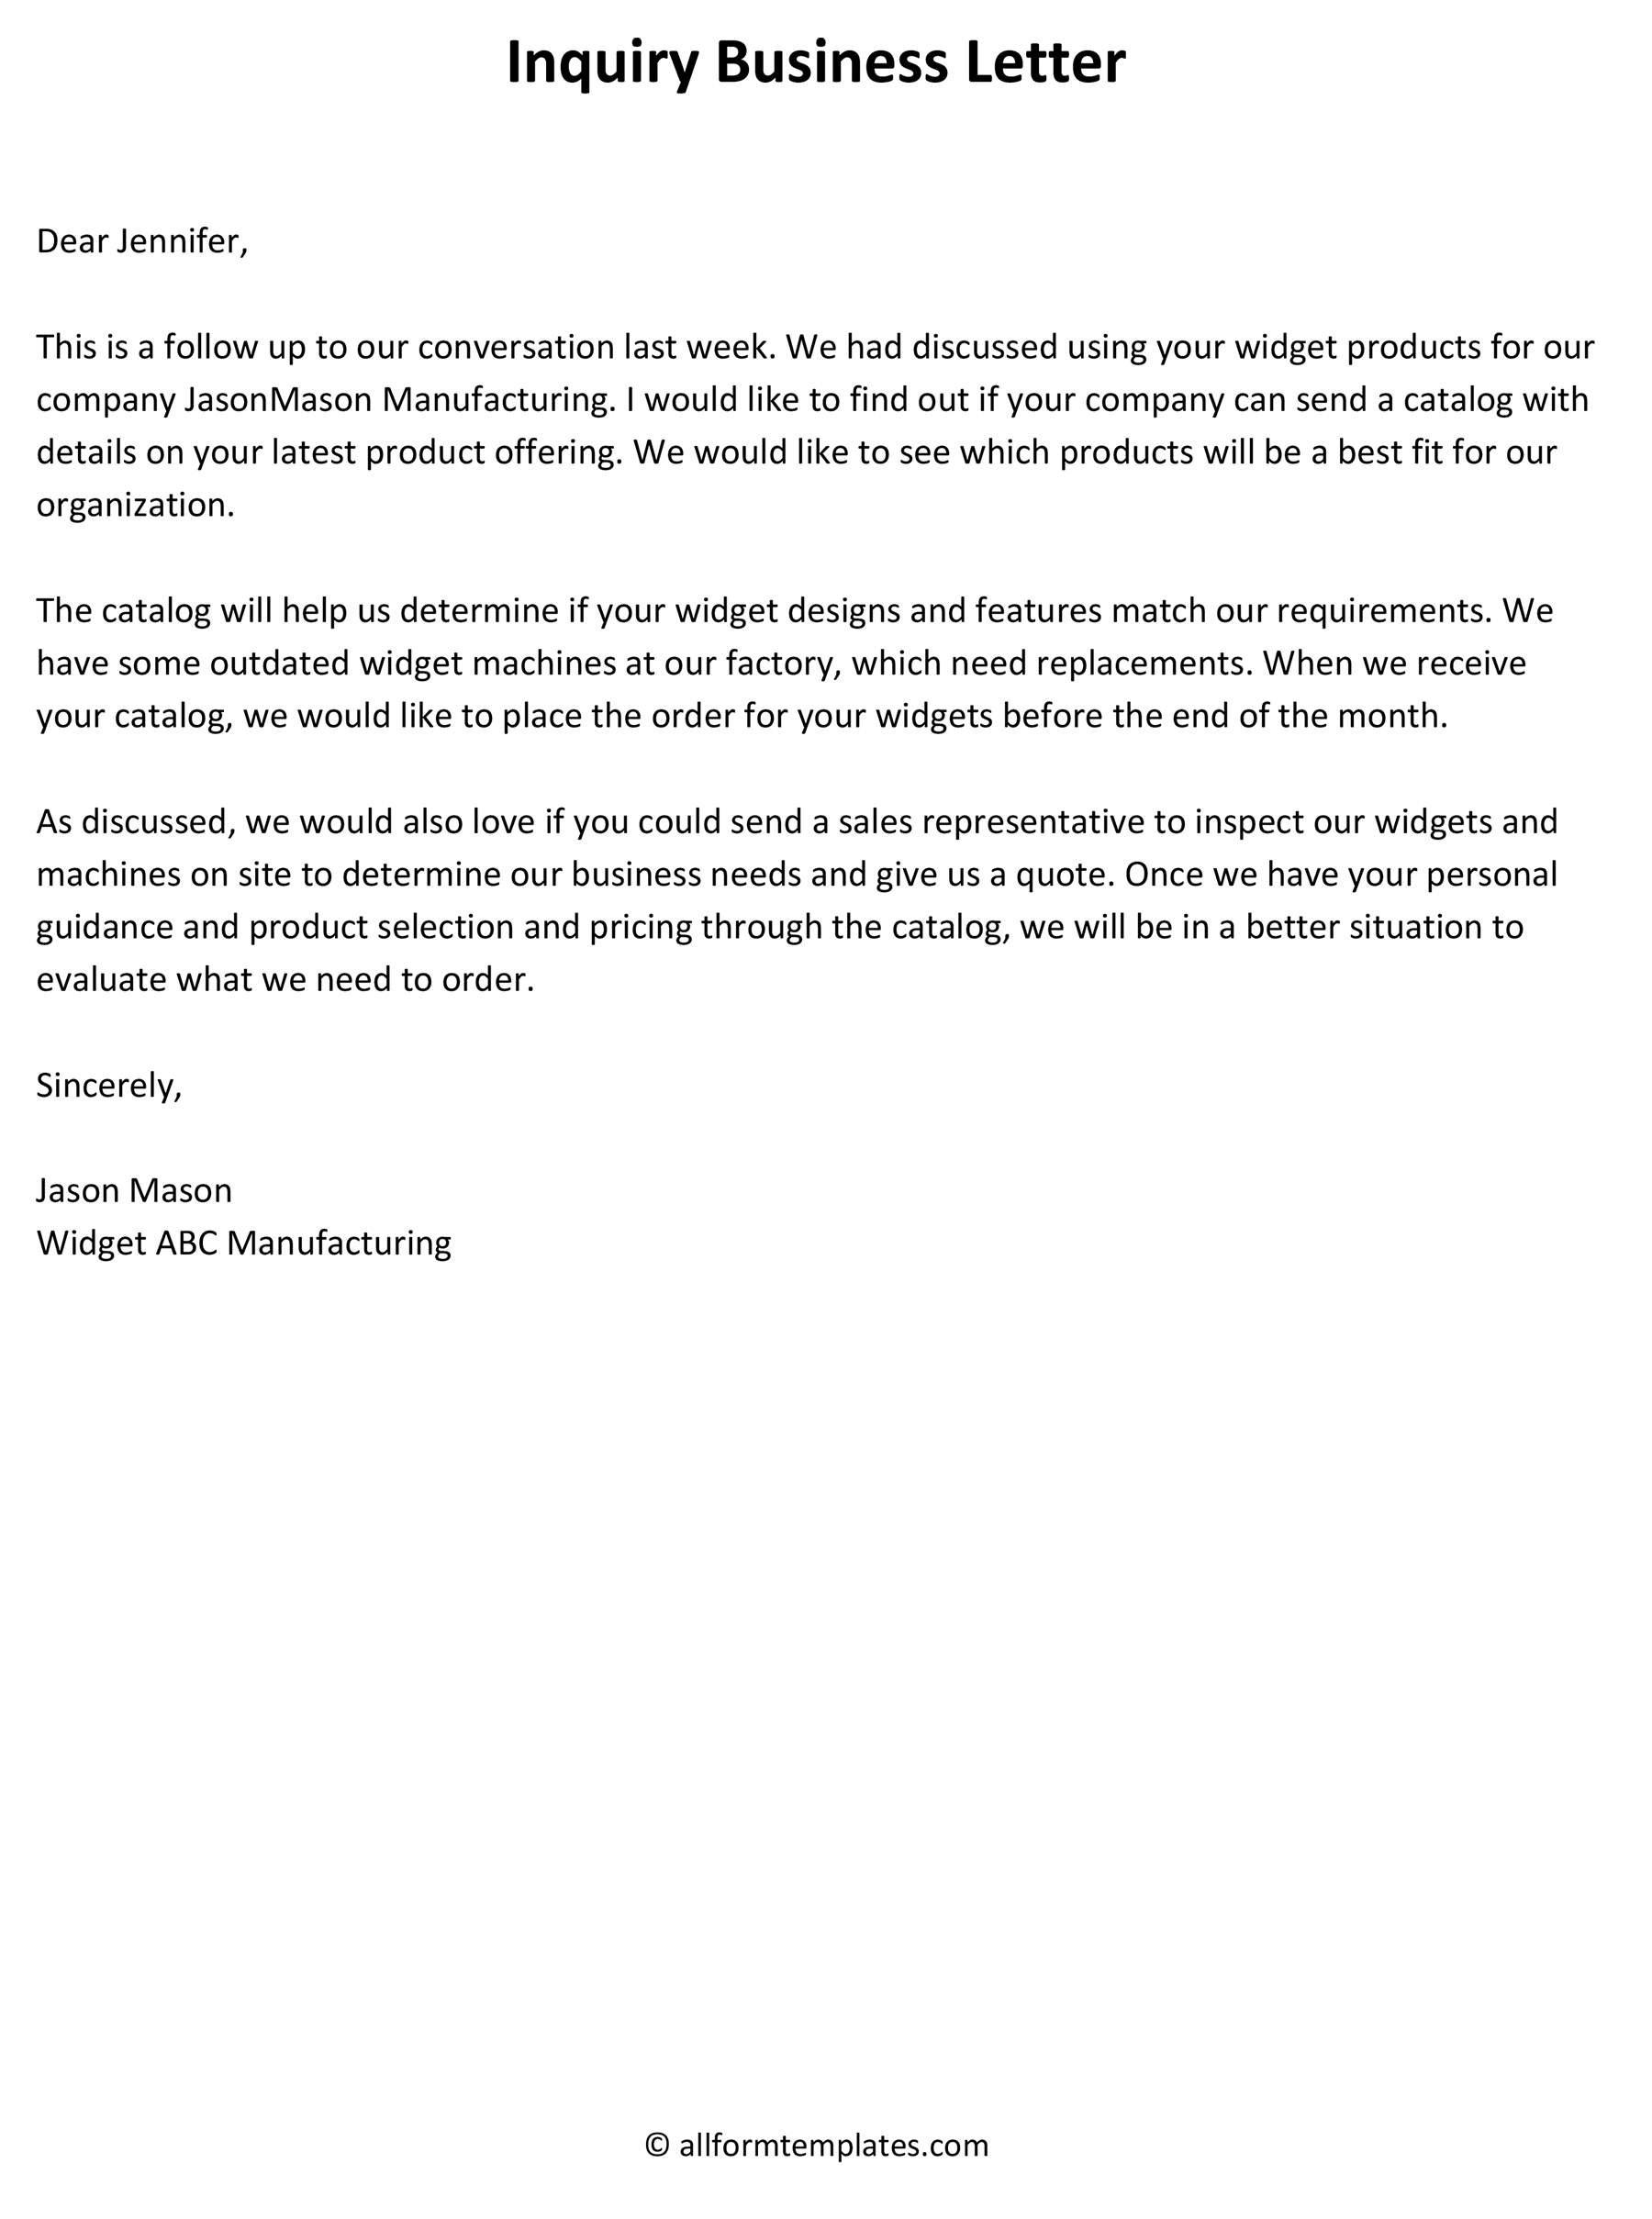 Inquiry-Business-Letter-03-HD